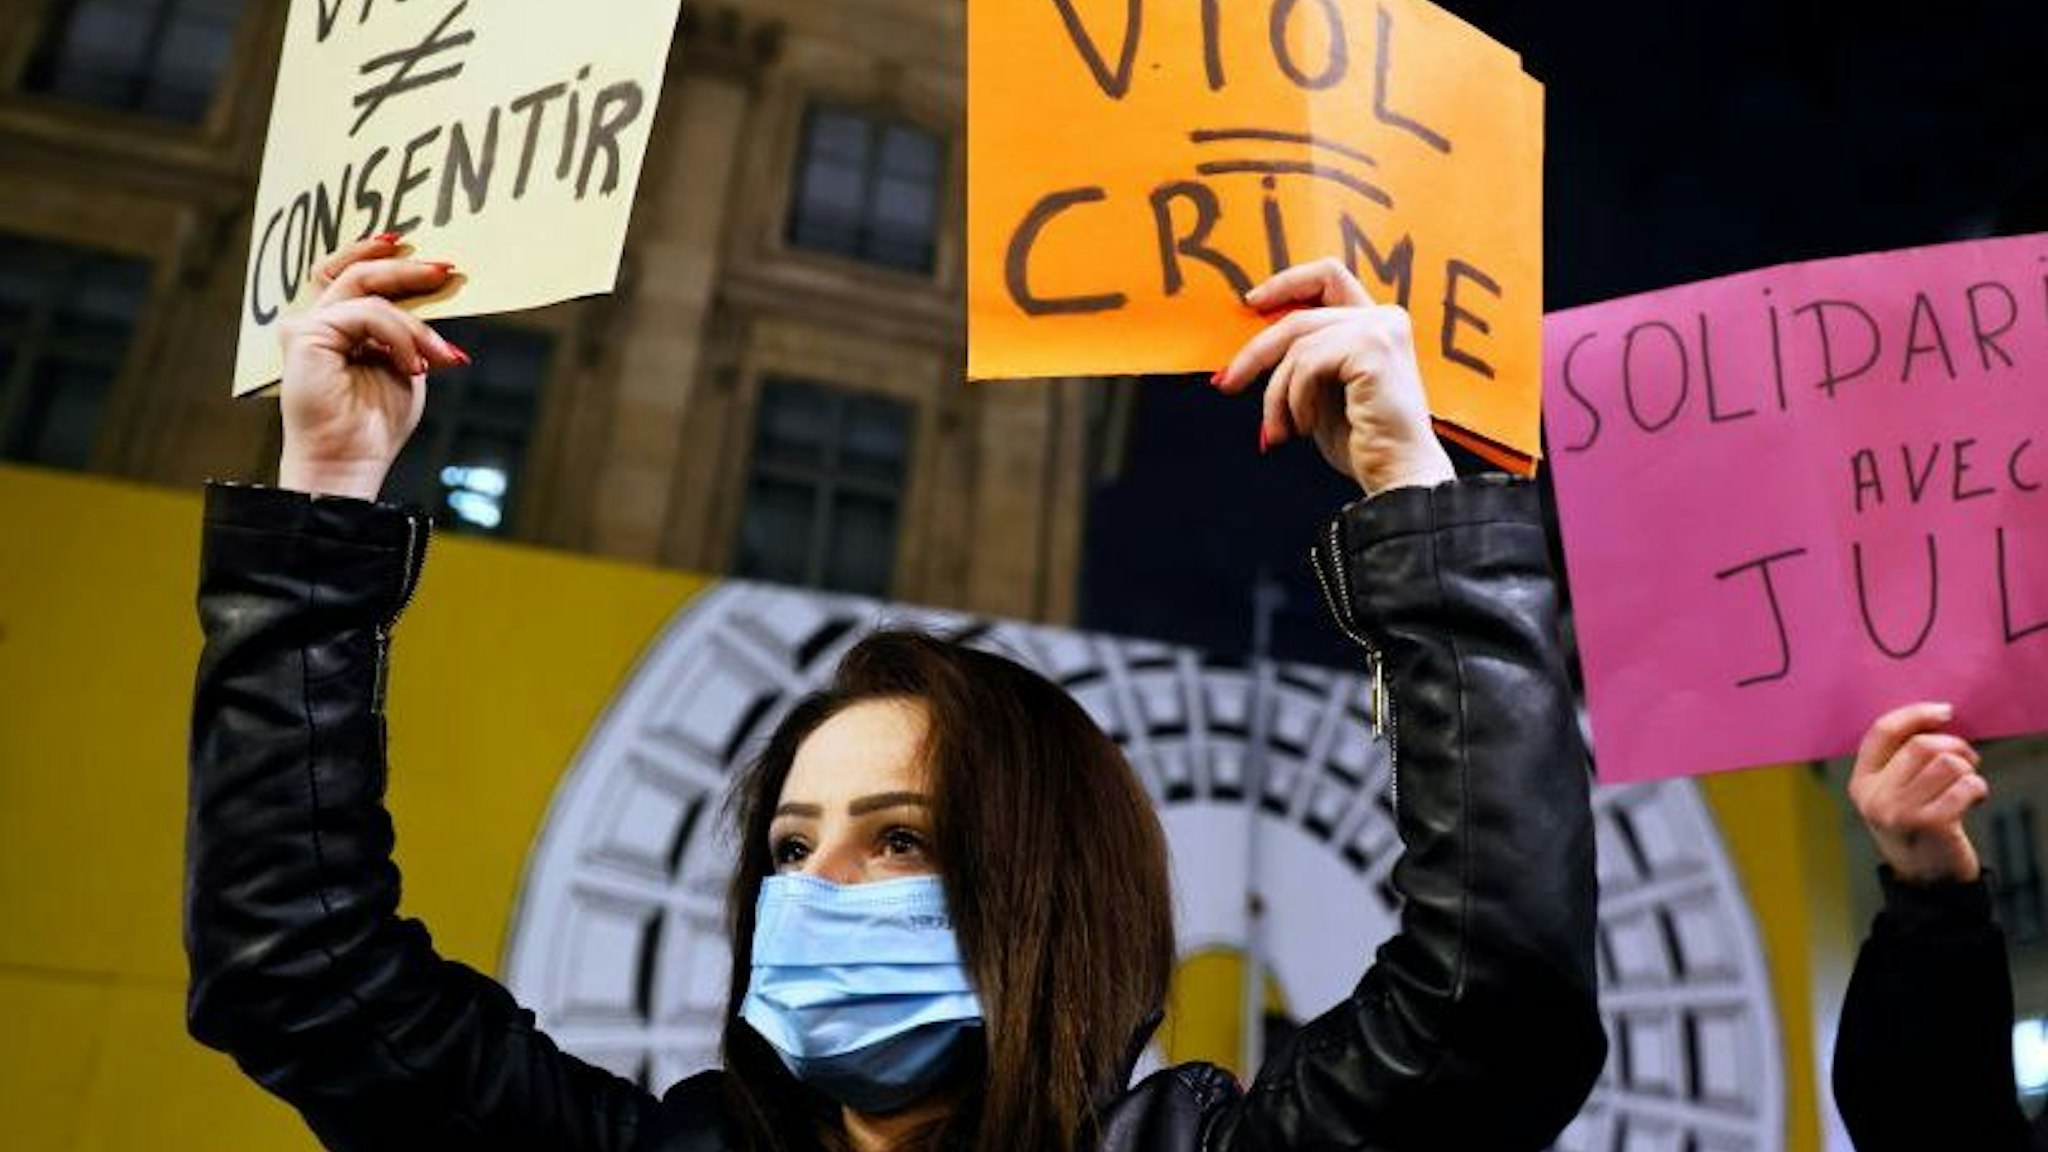 Protesters hold placards reading "Rape (does not equal) consent", "Rape = crime" and "Solidarity with Julie" on November 18, 2020, in Paris, during a demonstration called by feminist groups after a French court retained the legal classification of "sexual infringement", in the accusation of three firefighters over relations with a 14-year-old minor, "Julie", in 2009. - The Versailles court of appeal rejected on November 12 a request to reclassify the charges as "rape", retaining the classification of "sexual infringement". (Photo by Thomas SAMSON / AFP) (Photo by THOMAS SAMSON/AFP via Getty Images)